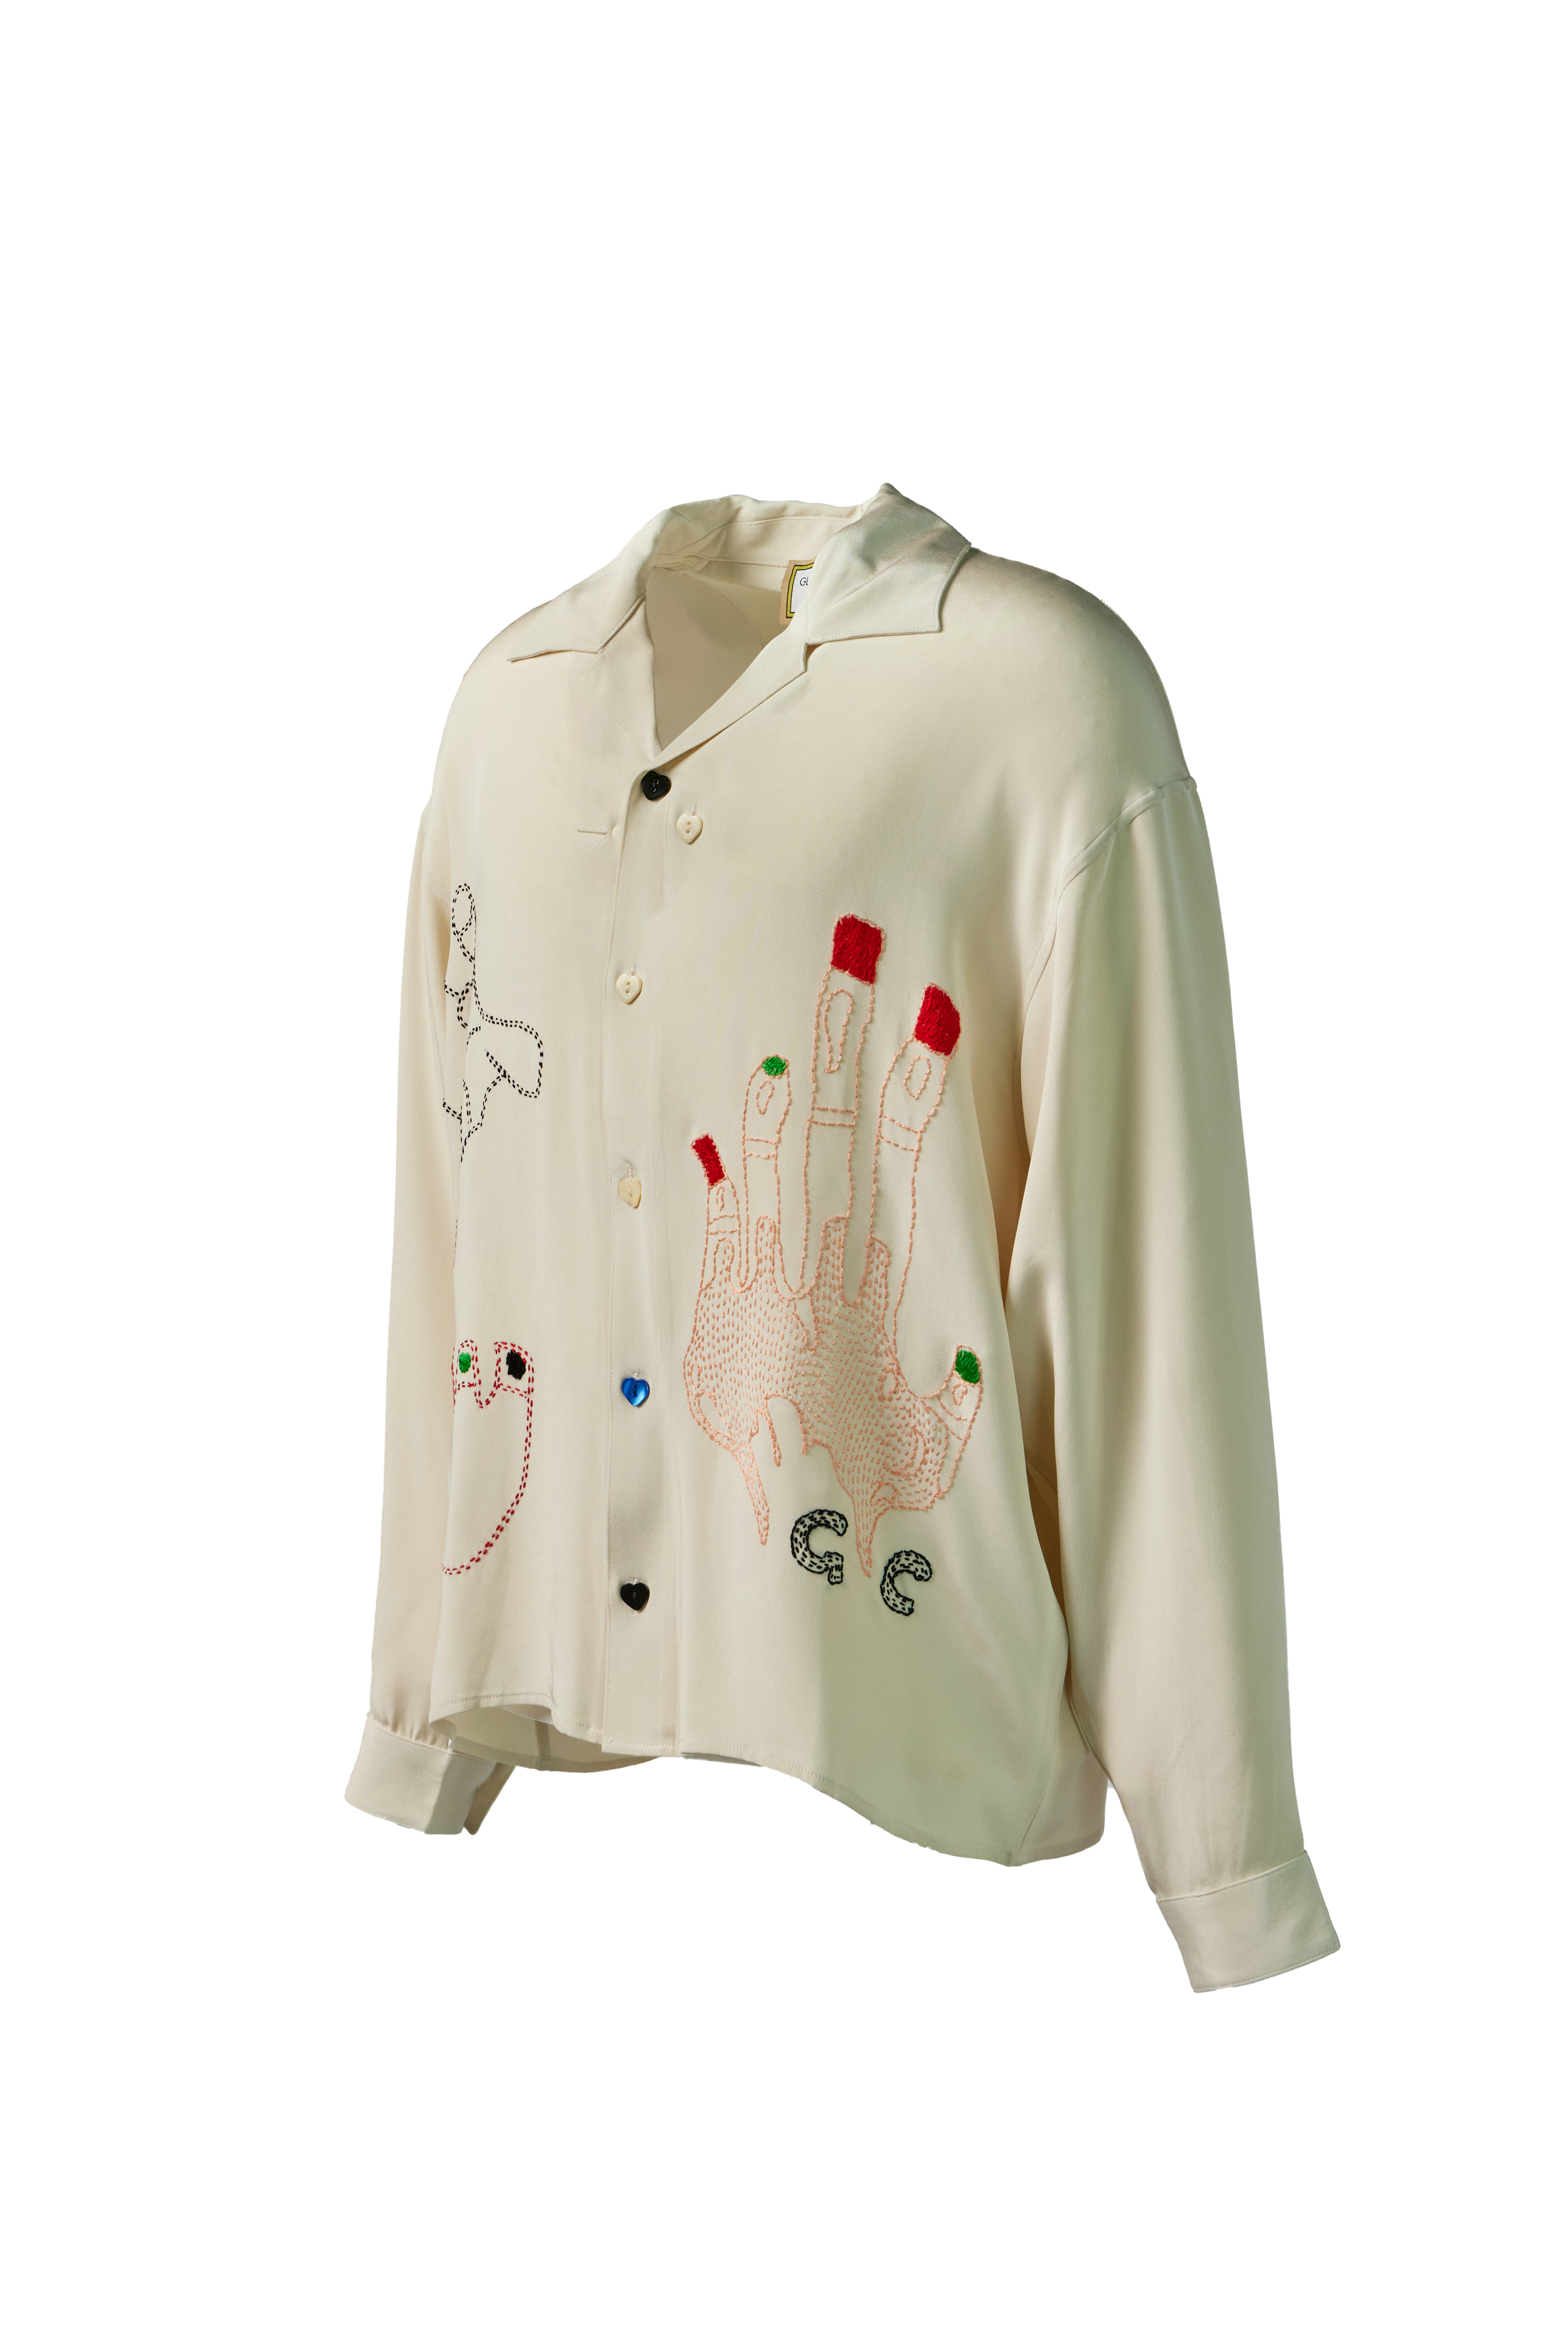 GLASS CYPRESS - Hands On Ivory Silk Shirt product image